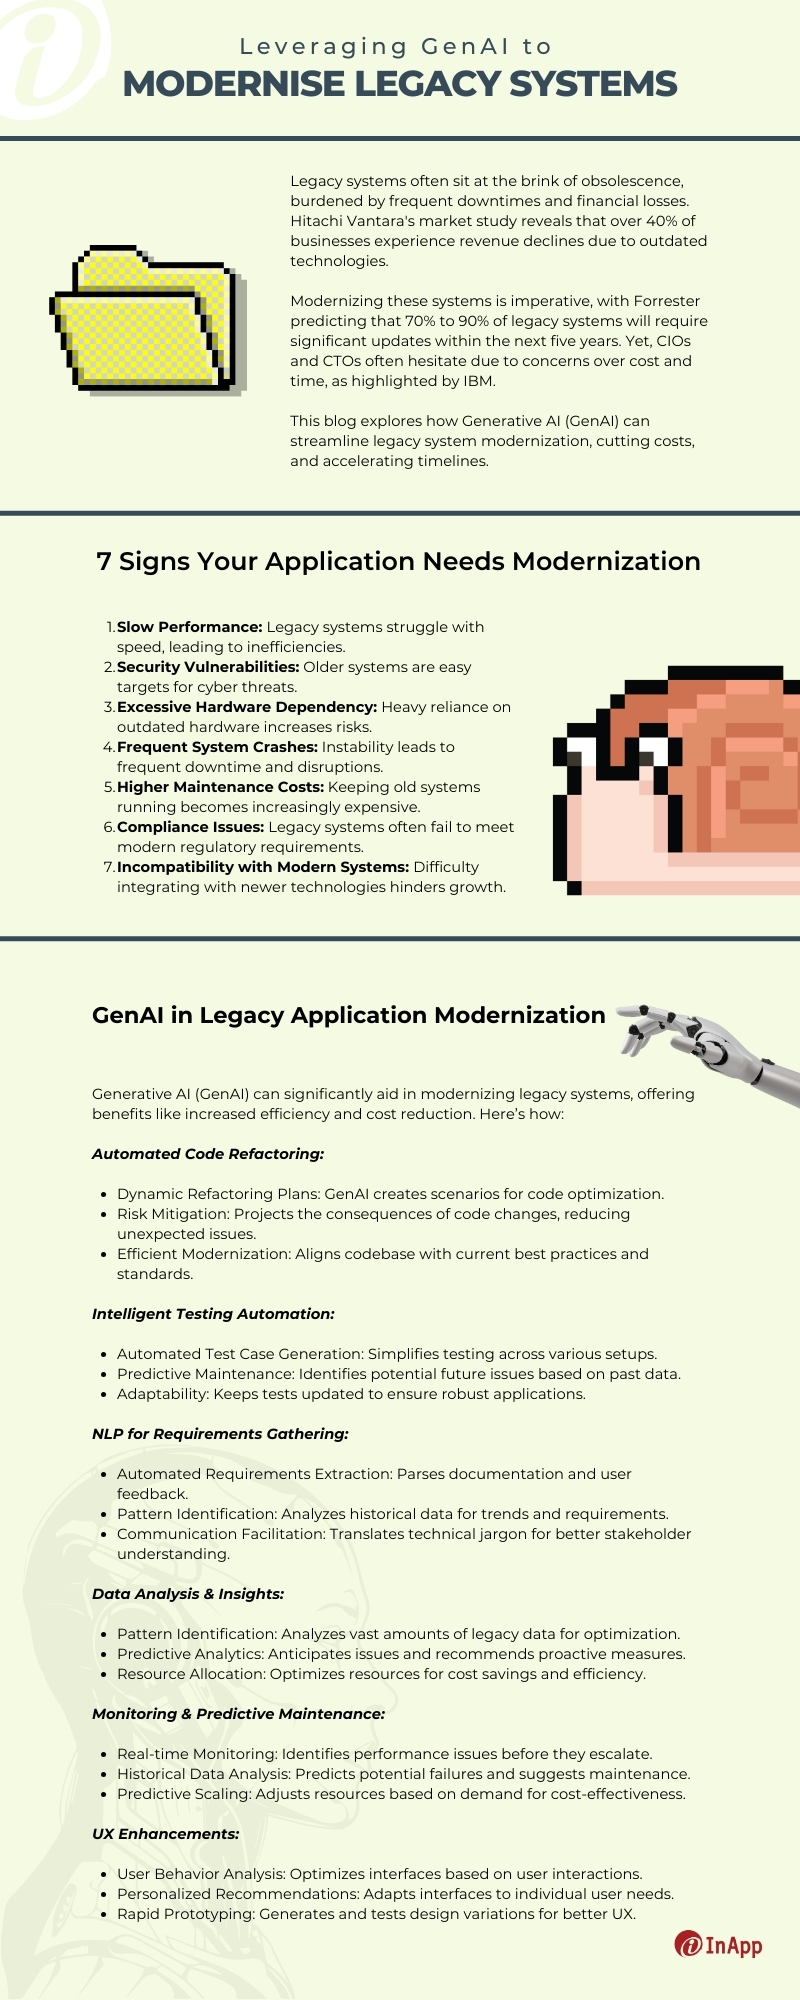 Leveraging GenAI to Modernise Legacy Systems - Short Infographics